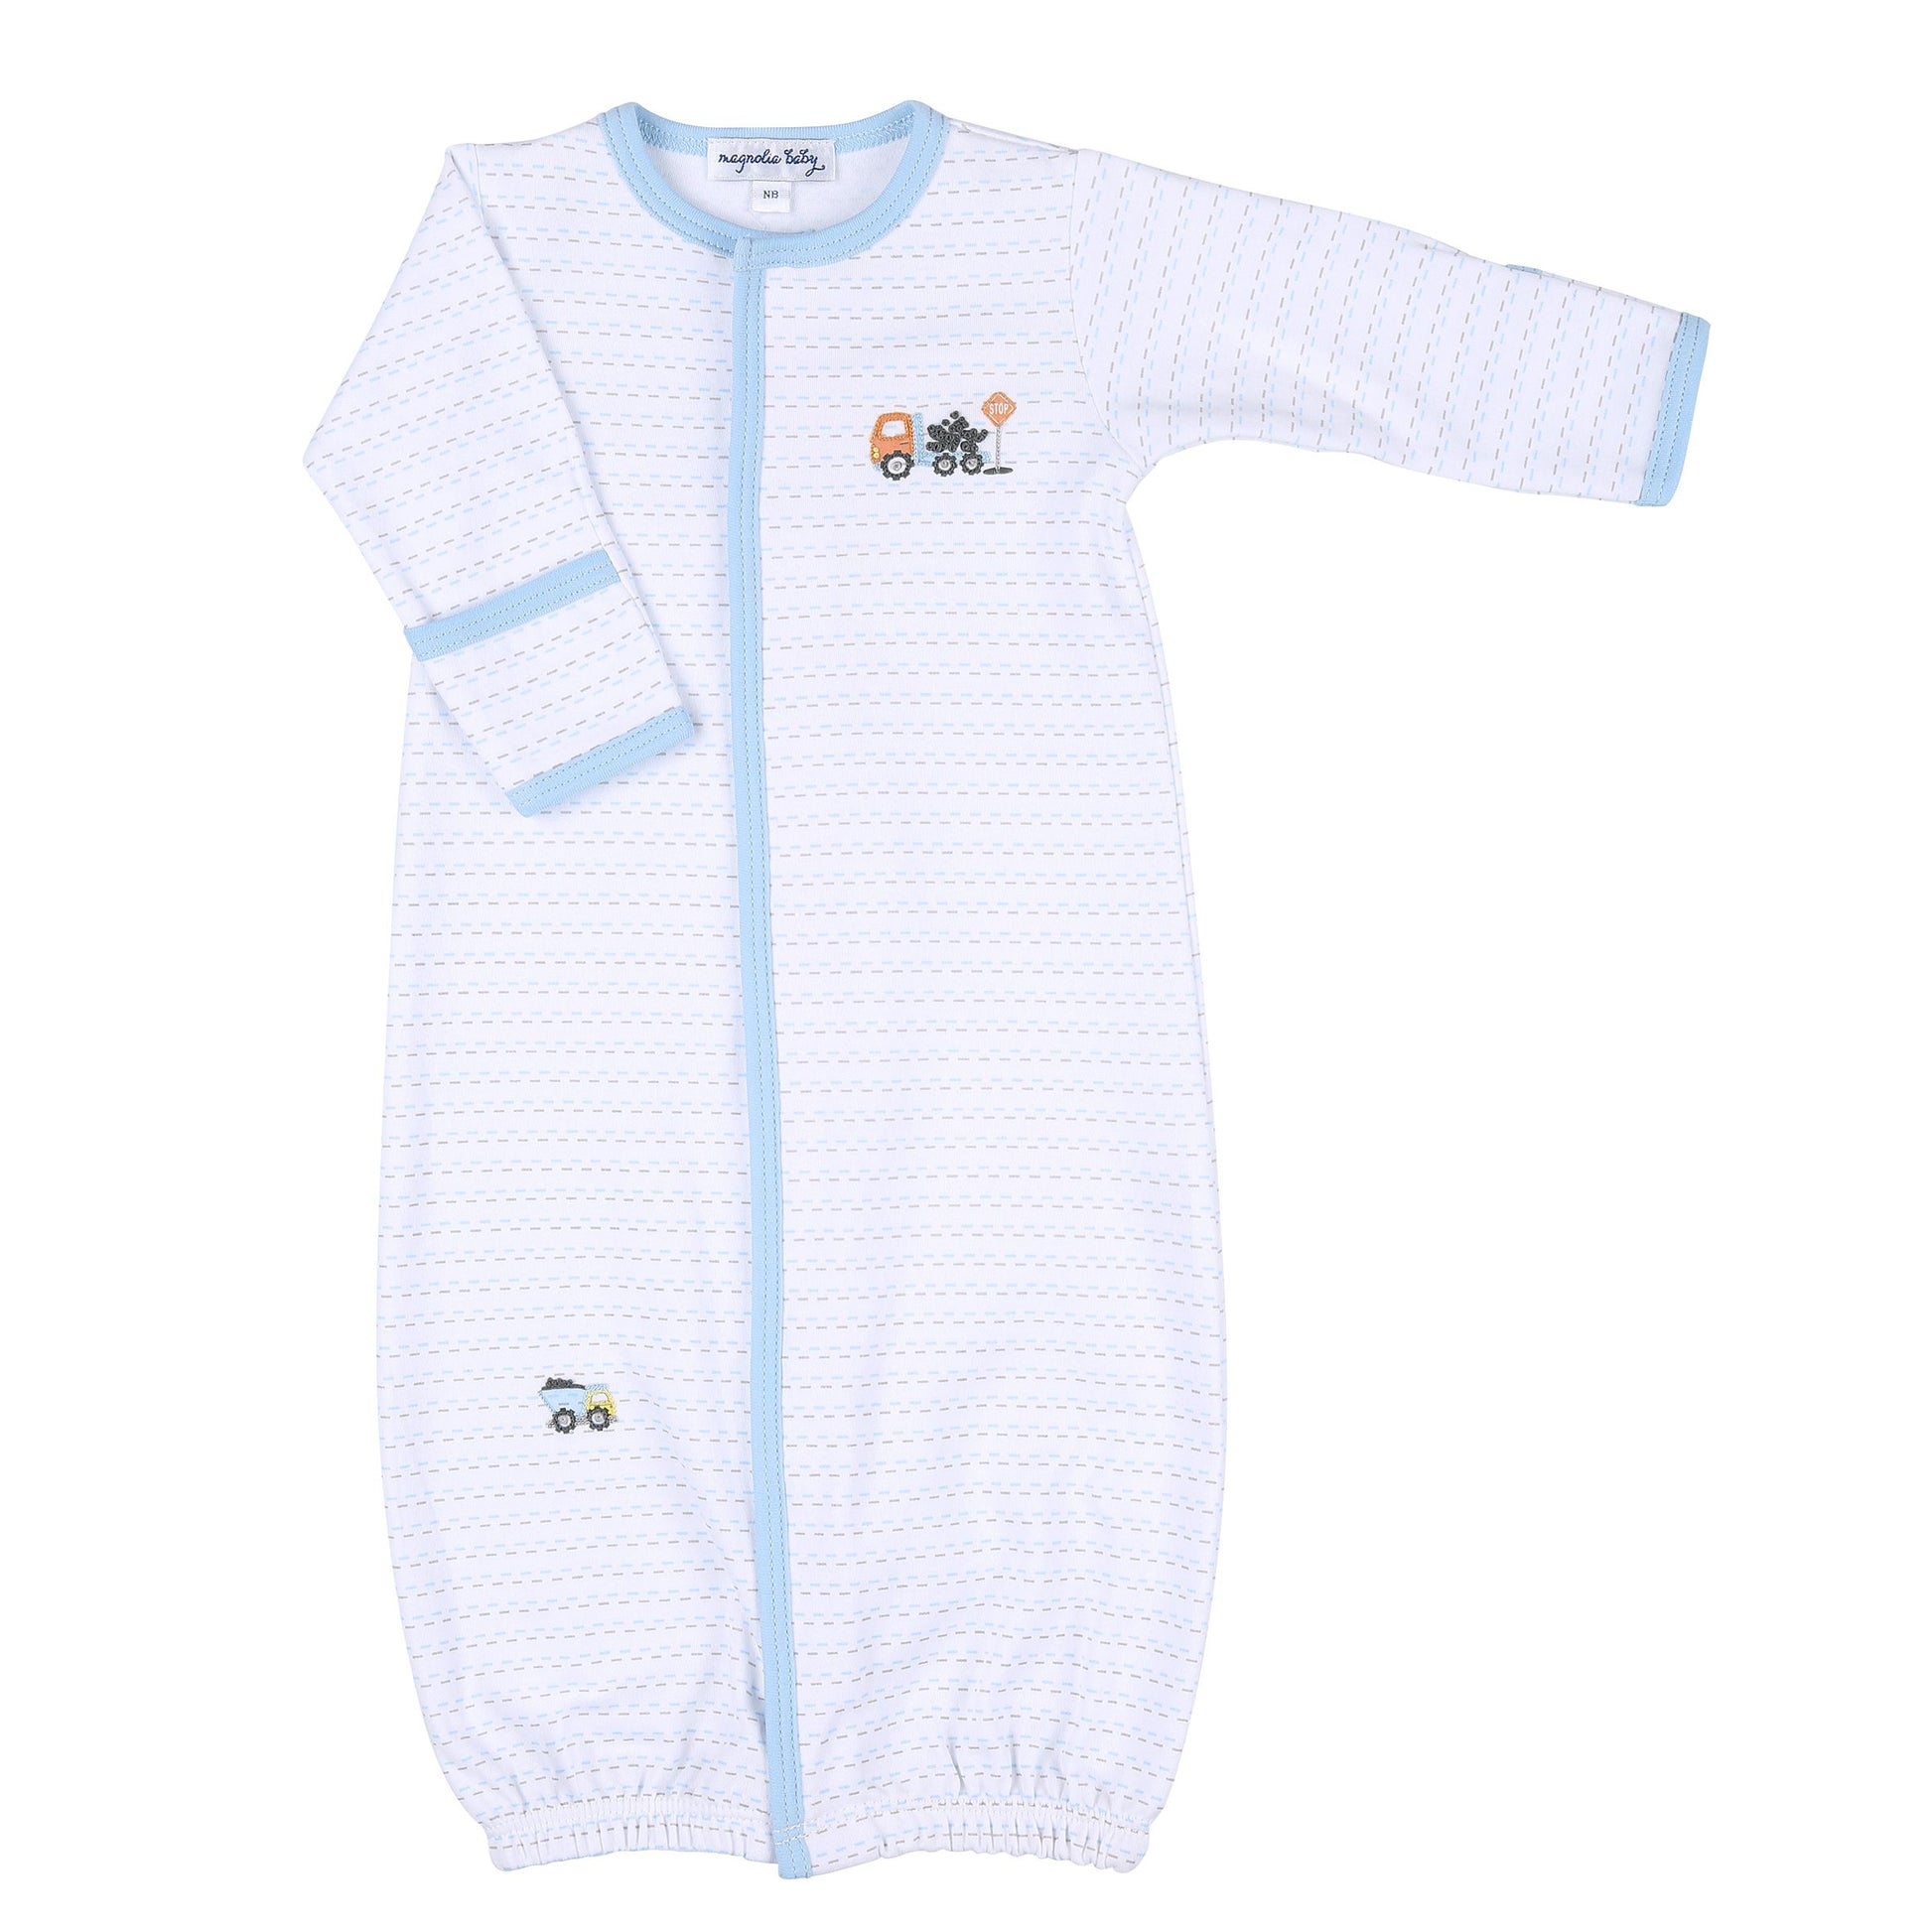 Magnolia Baby Construction Zone Embroidered Converter